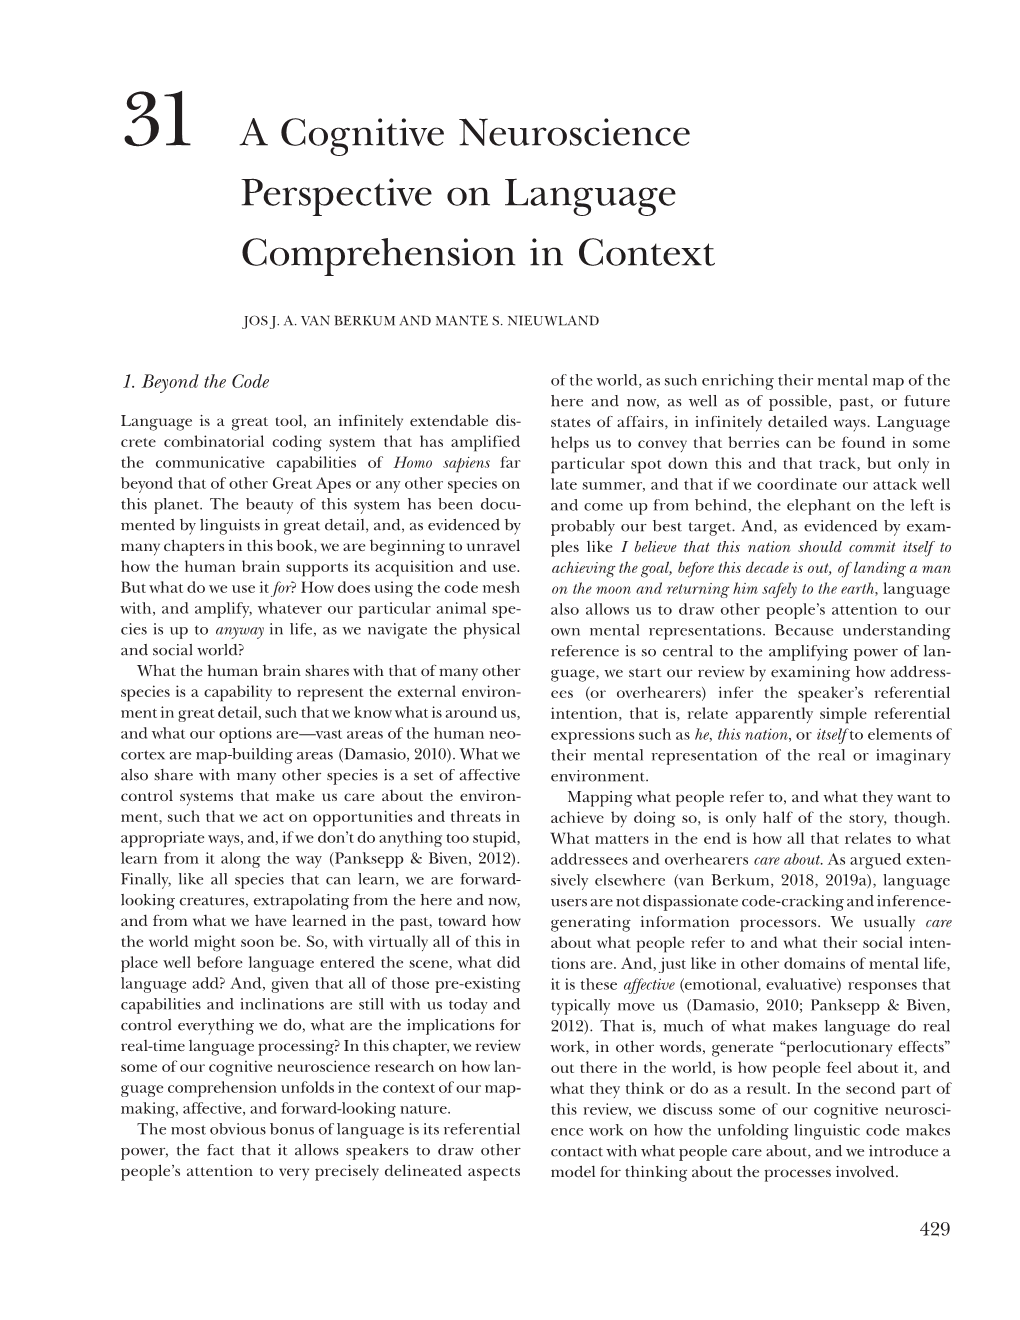 A Cognitive Neuroscience Perspective on Language Comprehension in Context